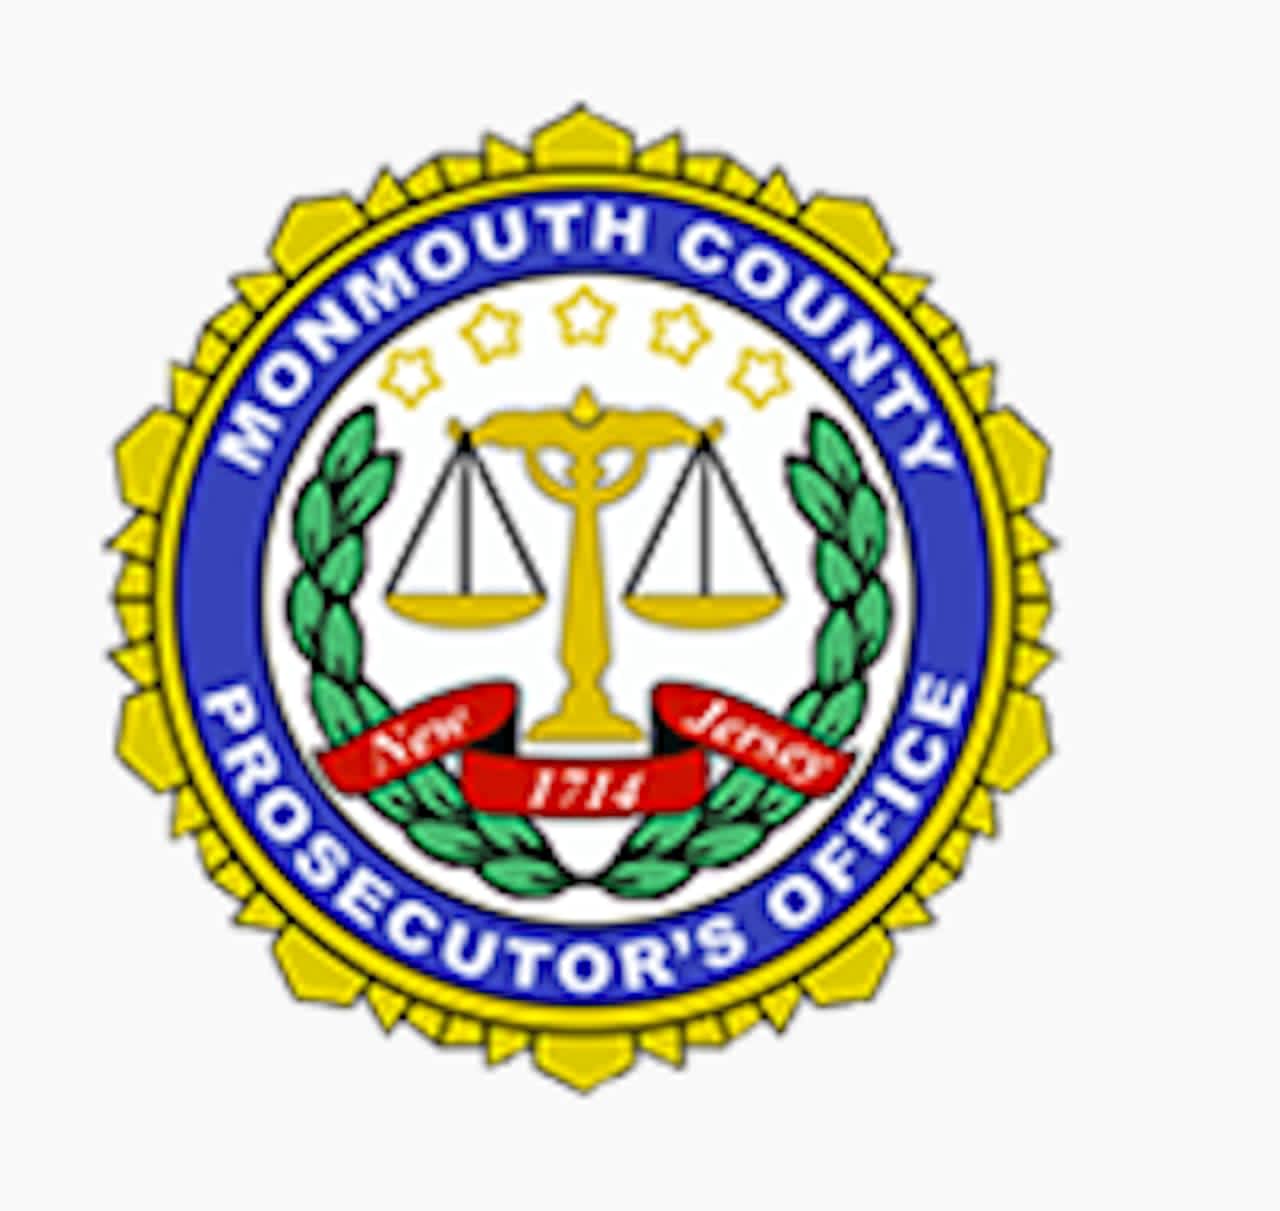 The Monmouth County Prosecutor's Office is investigating a shooting in Asbury Park.